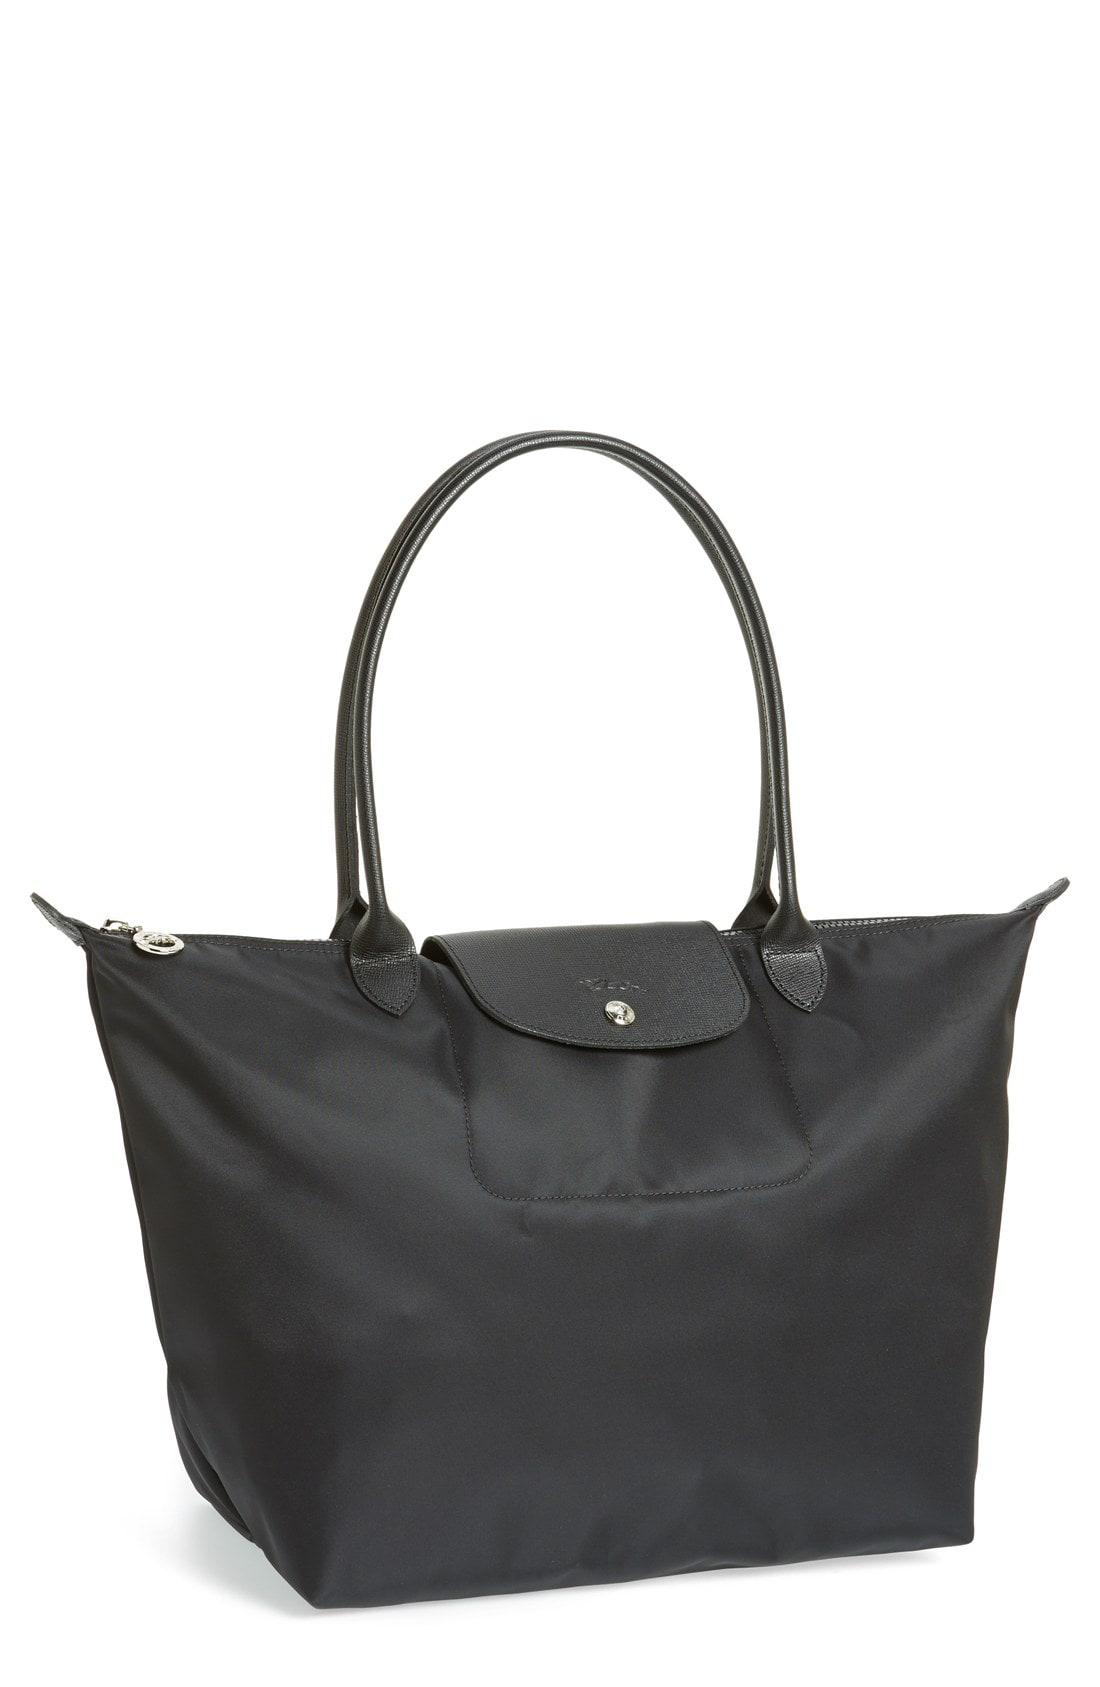 Lyst - Longchamp 'large Le Pliage Neo' Nylon Tote in Blue - Save 44%